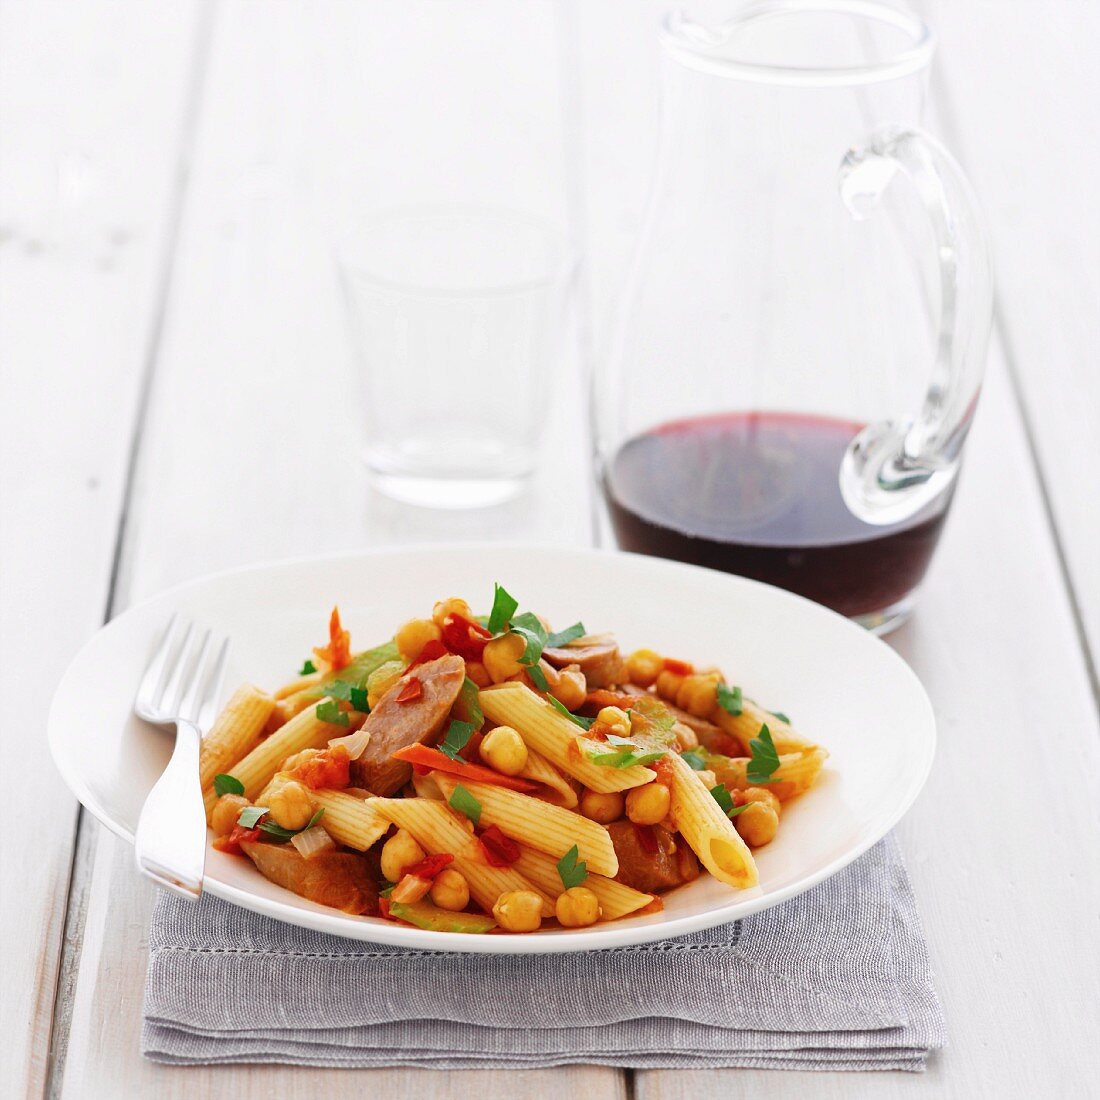 Pasta with Vegetables, Sausages and chickpeas